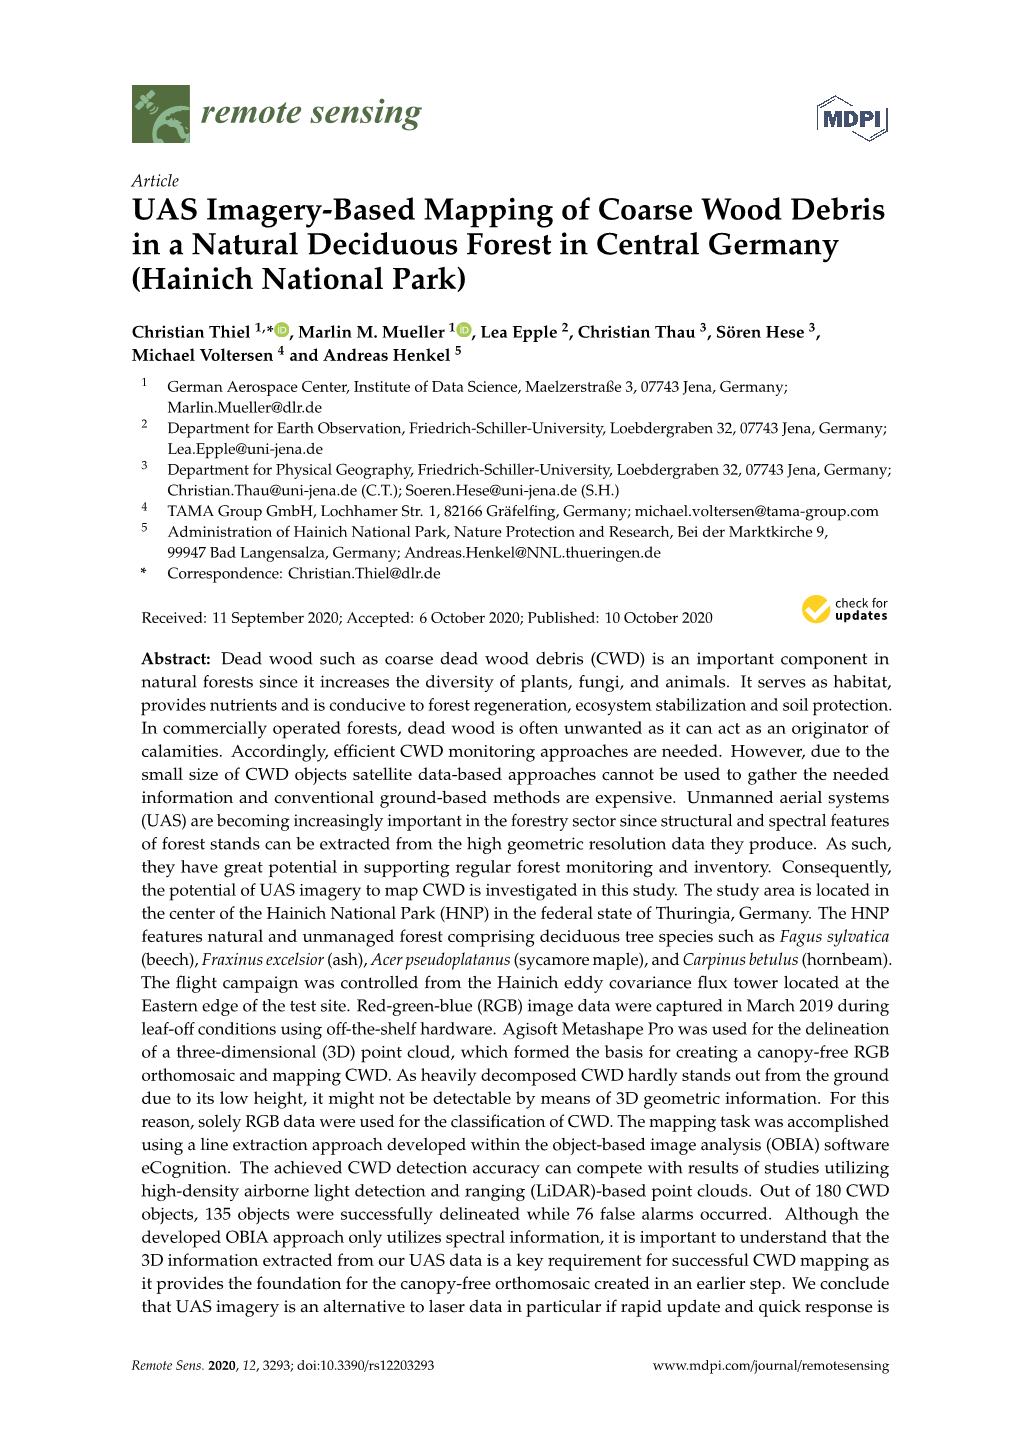 UAS Imagery-Based Mapping of Coarse Wood Debris in a Natural Deciduous Forest in Central Germany (Hainich National Park)